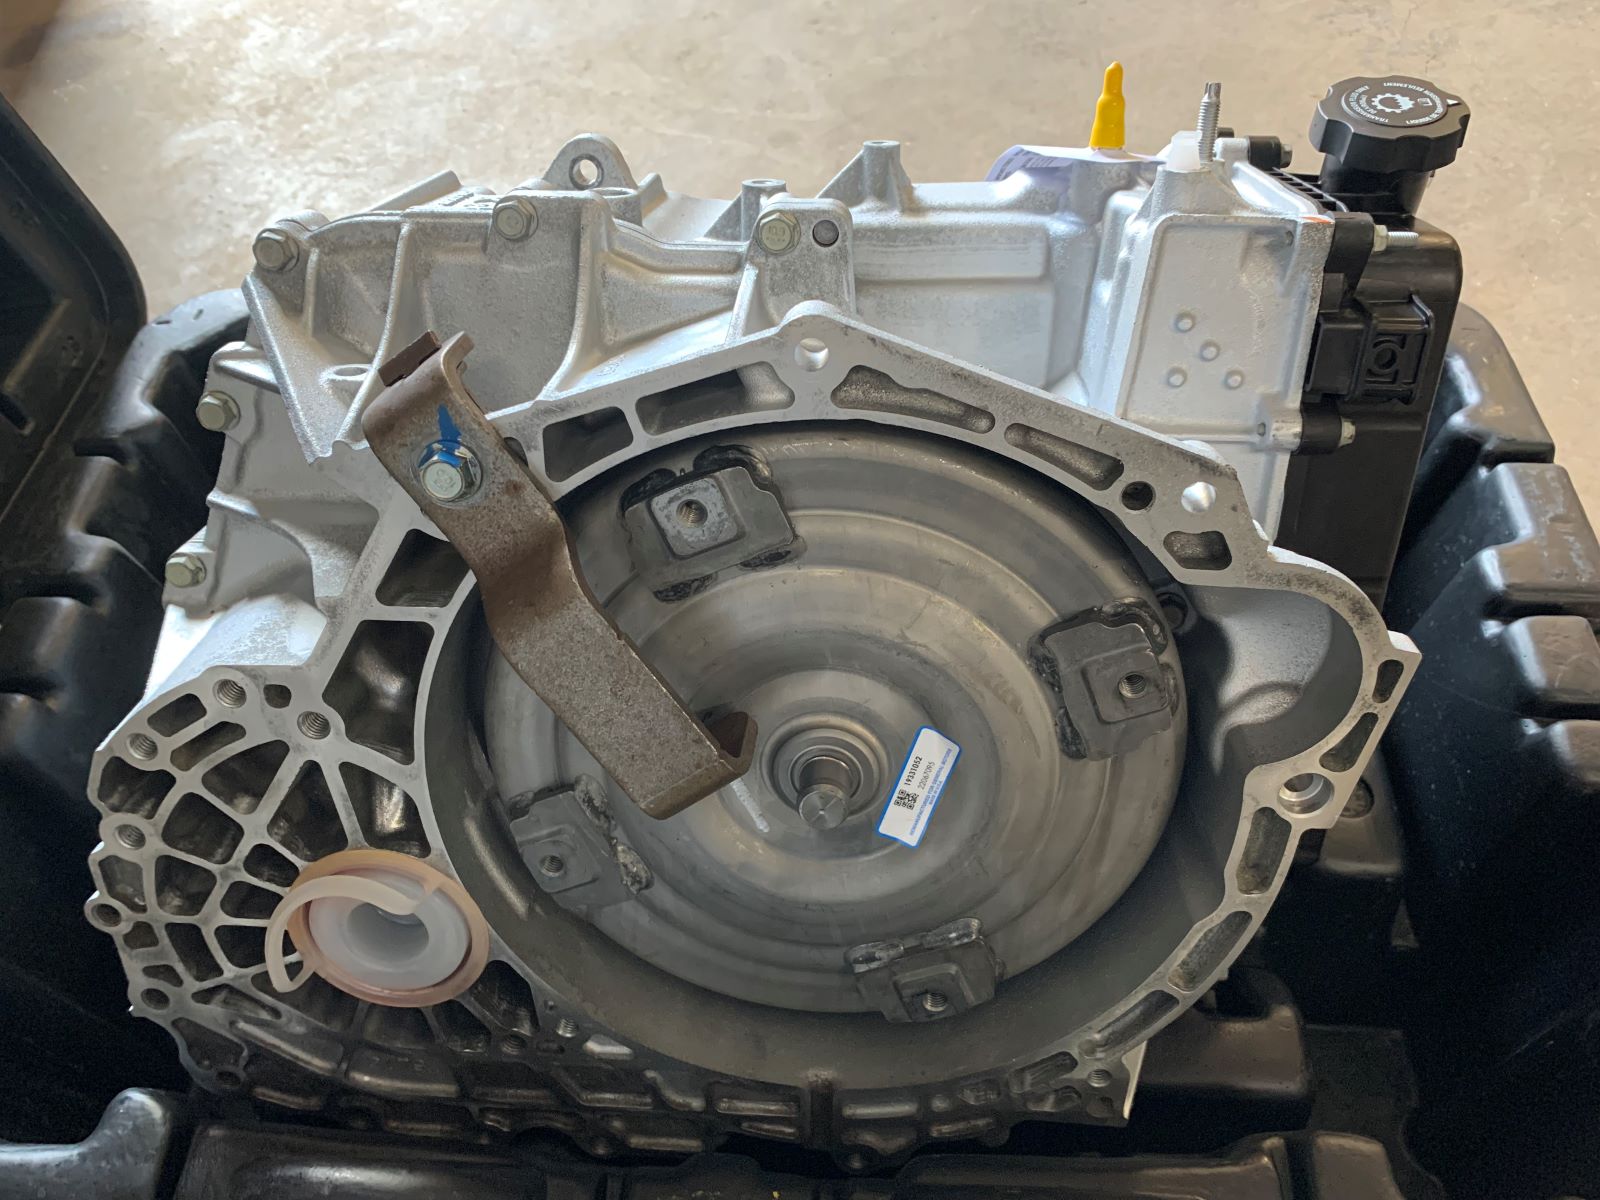 5 Clear Signs Your Transmission Is Slipping